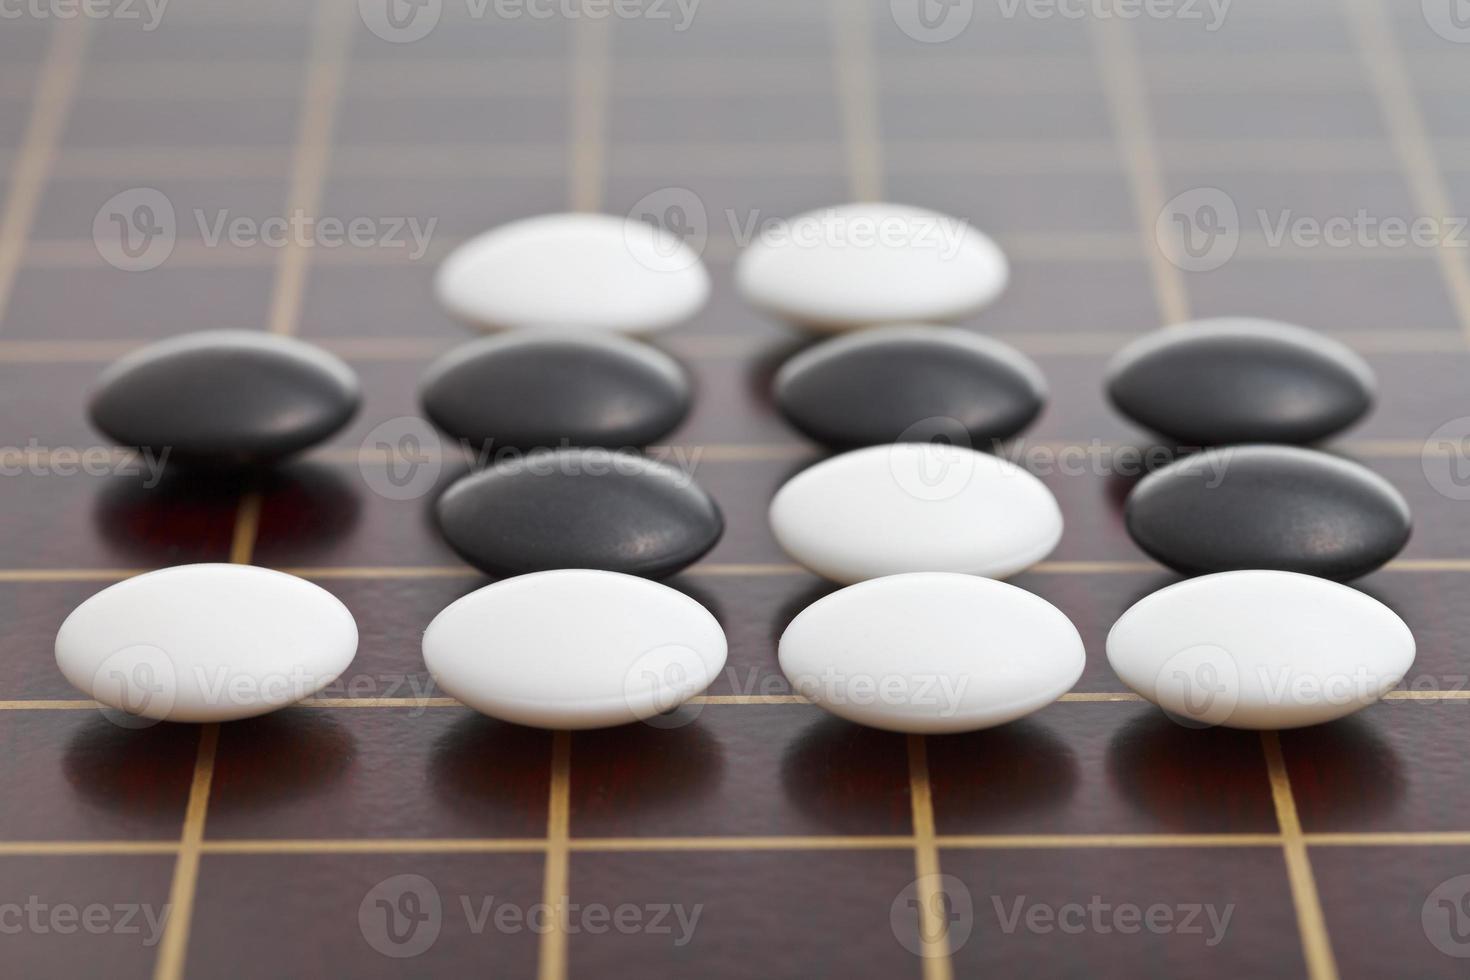 stones during go game playing on wooden board photo